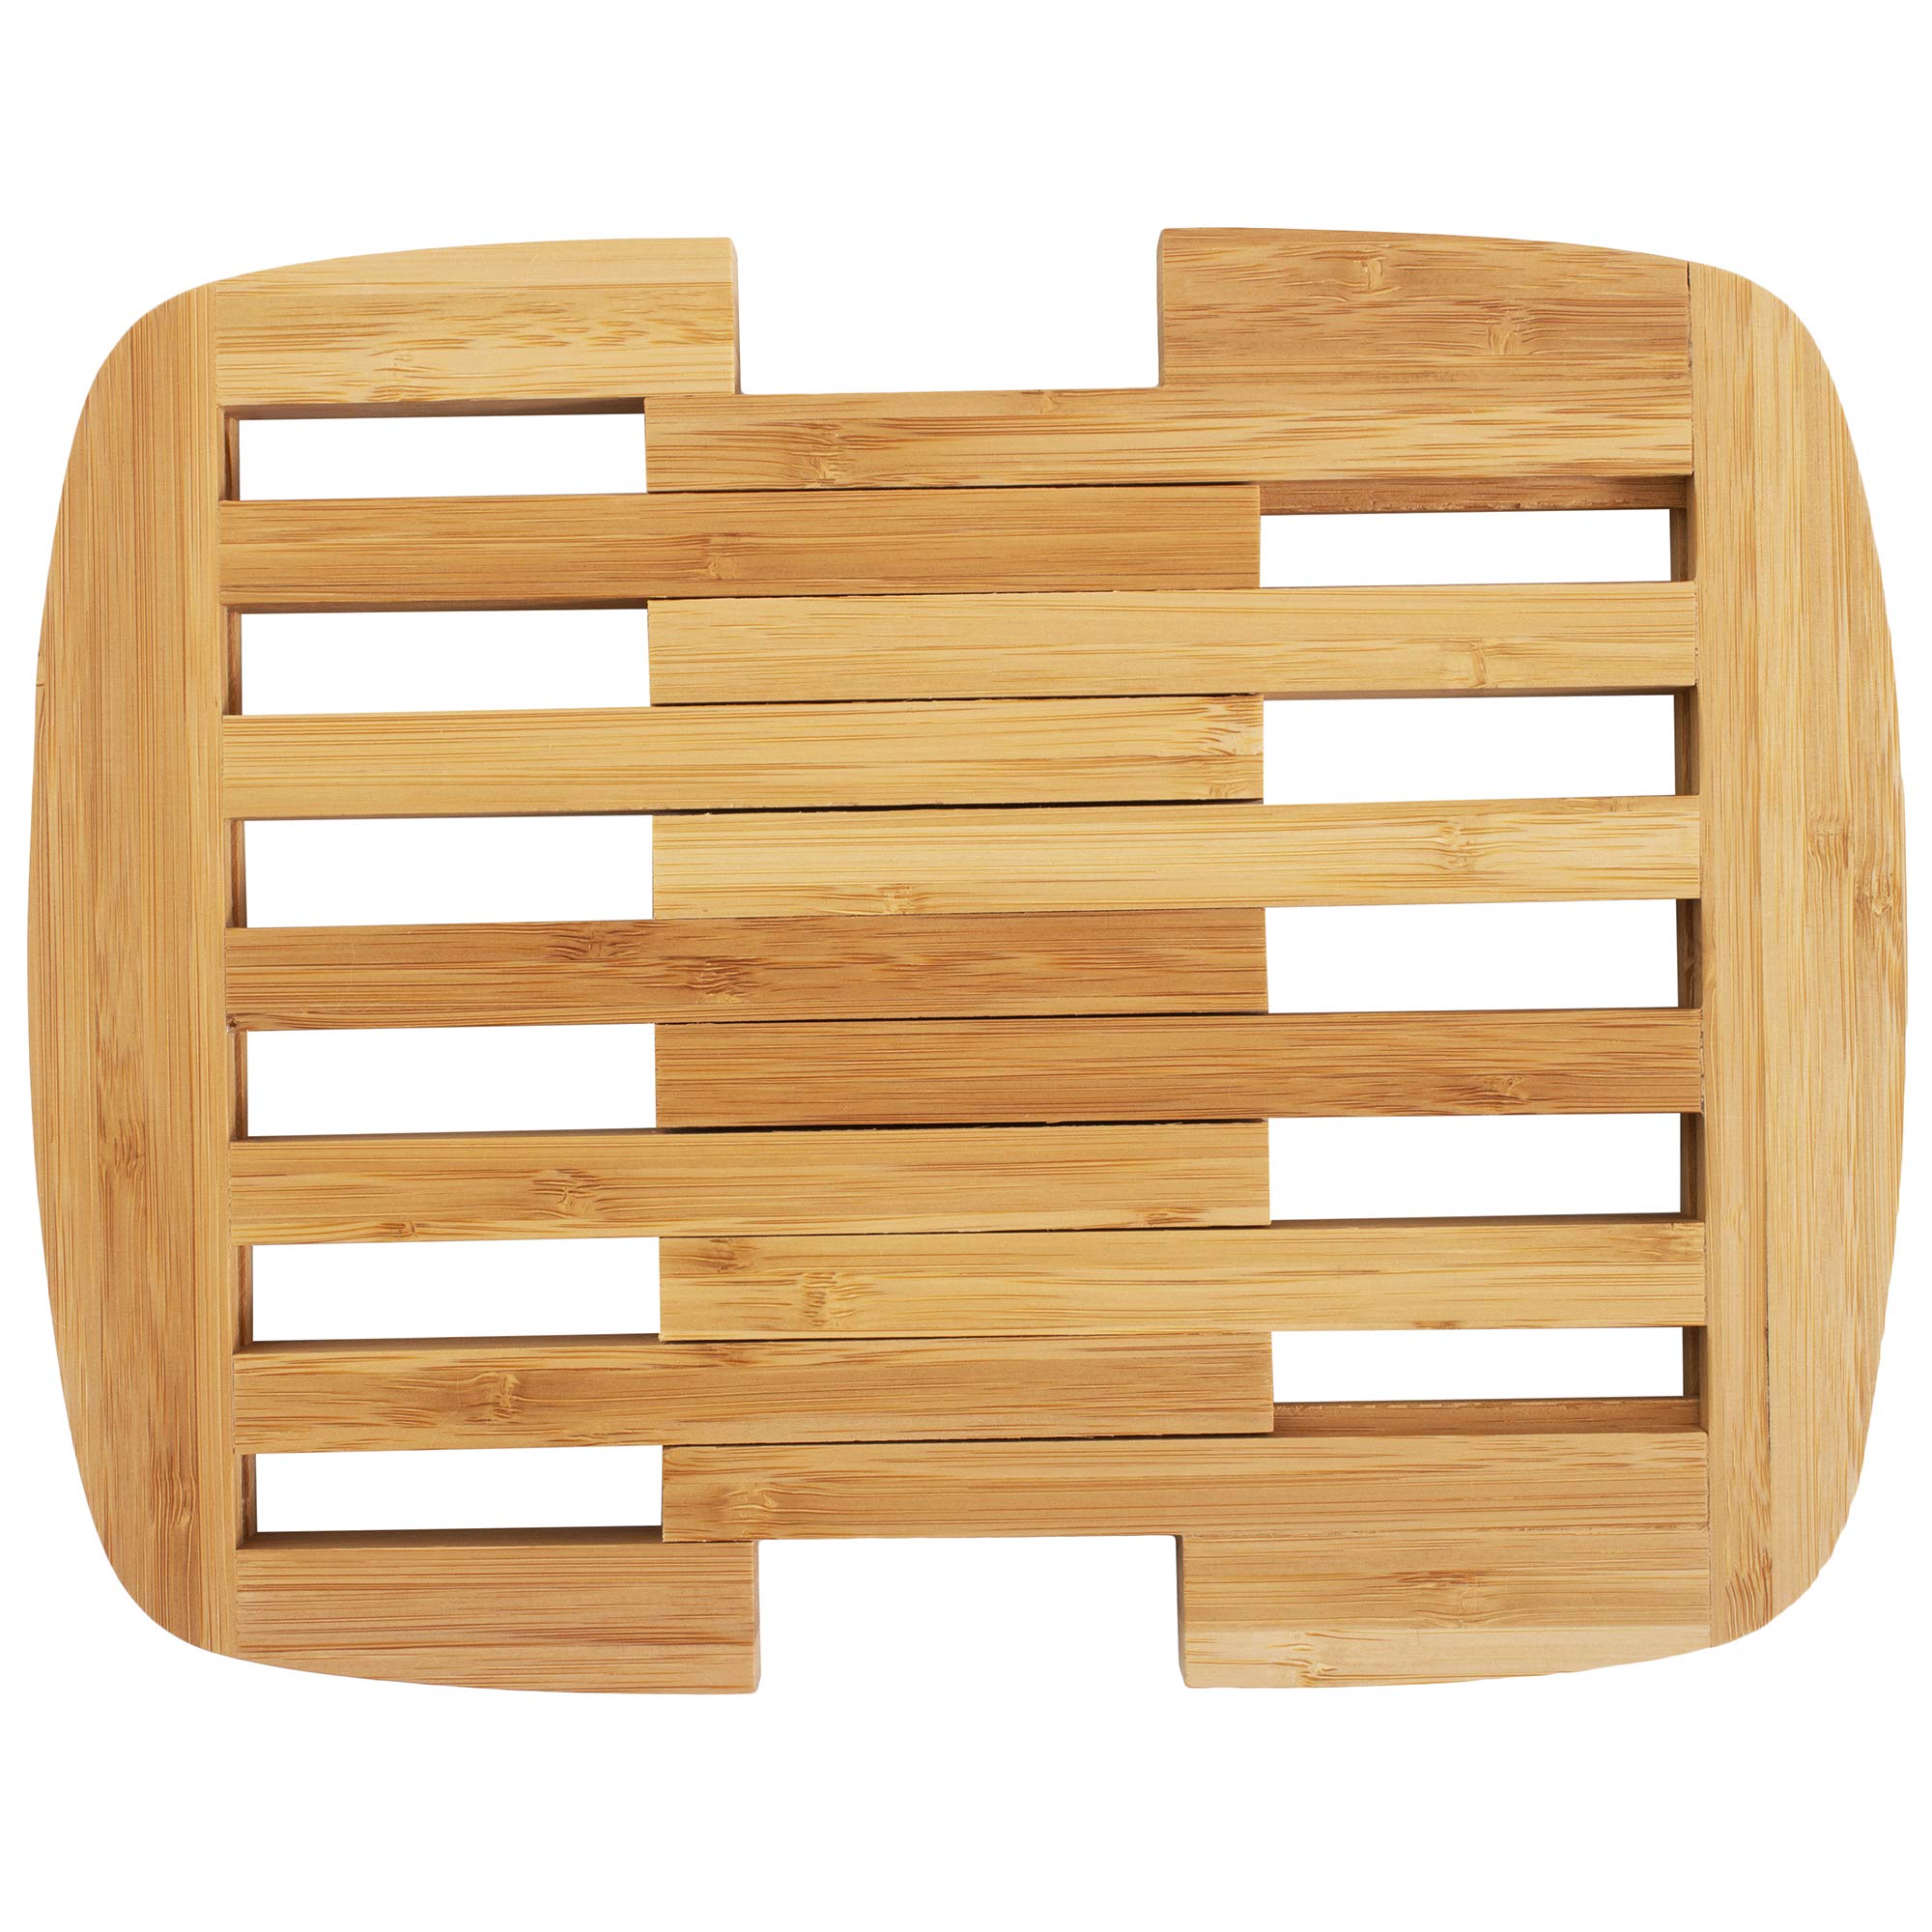 Totally Bamboo Expandable Bamboo Trivet, 8.75" by 8.75", Brown